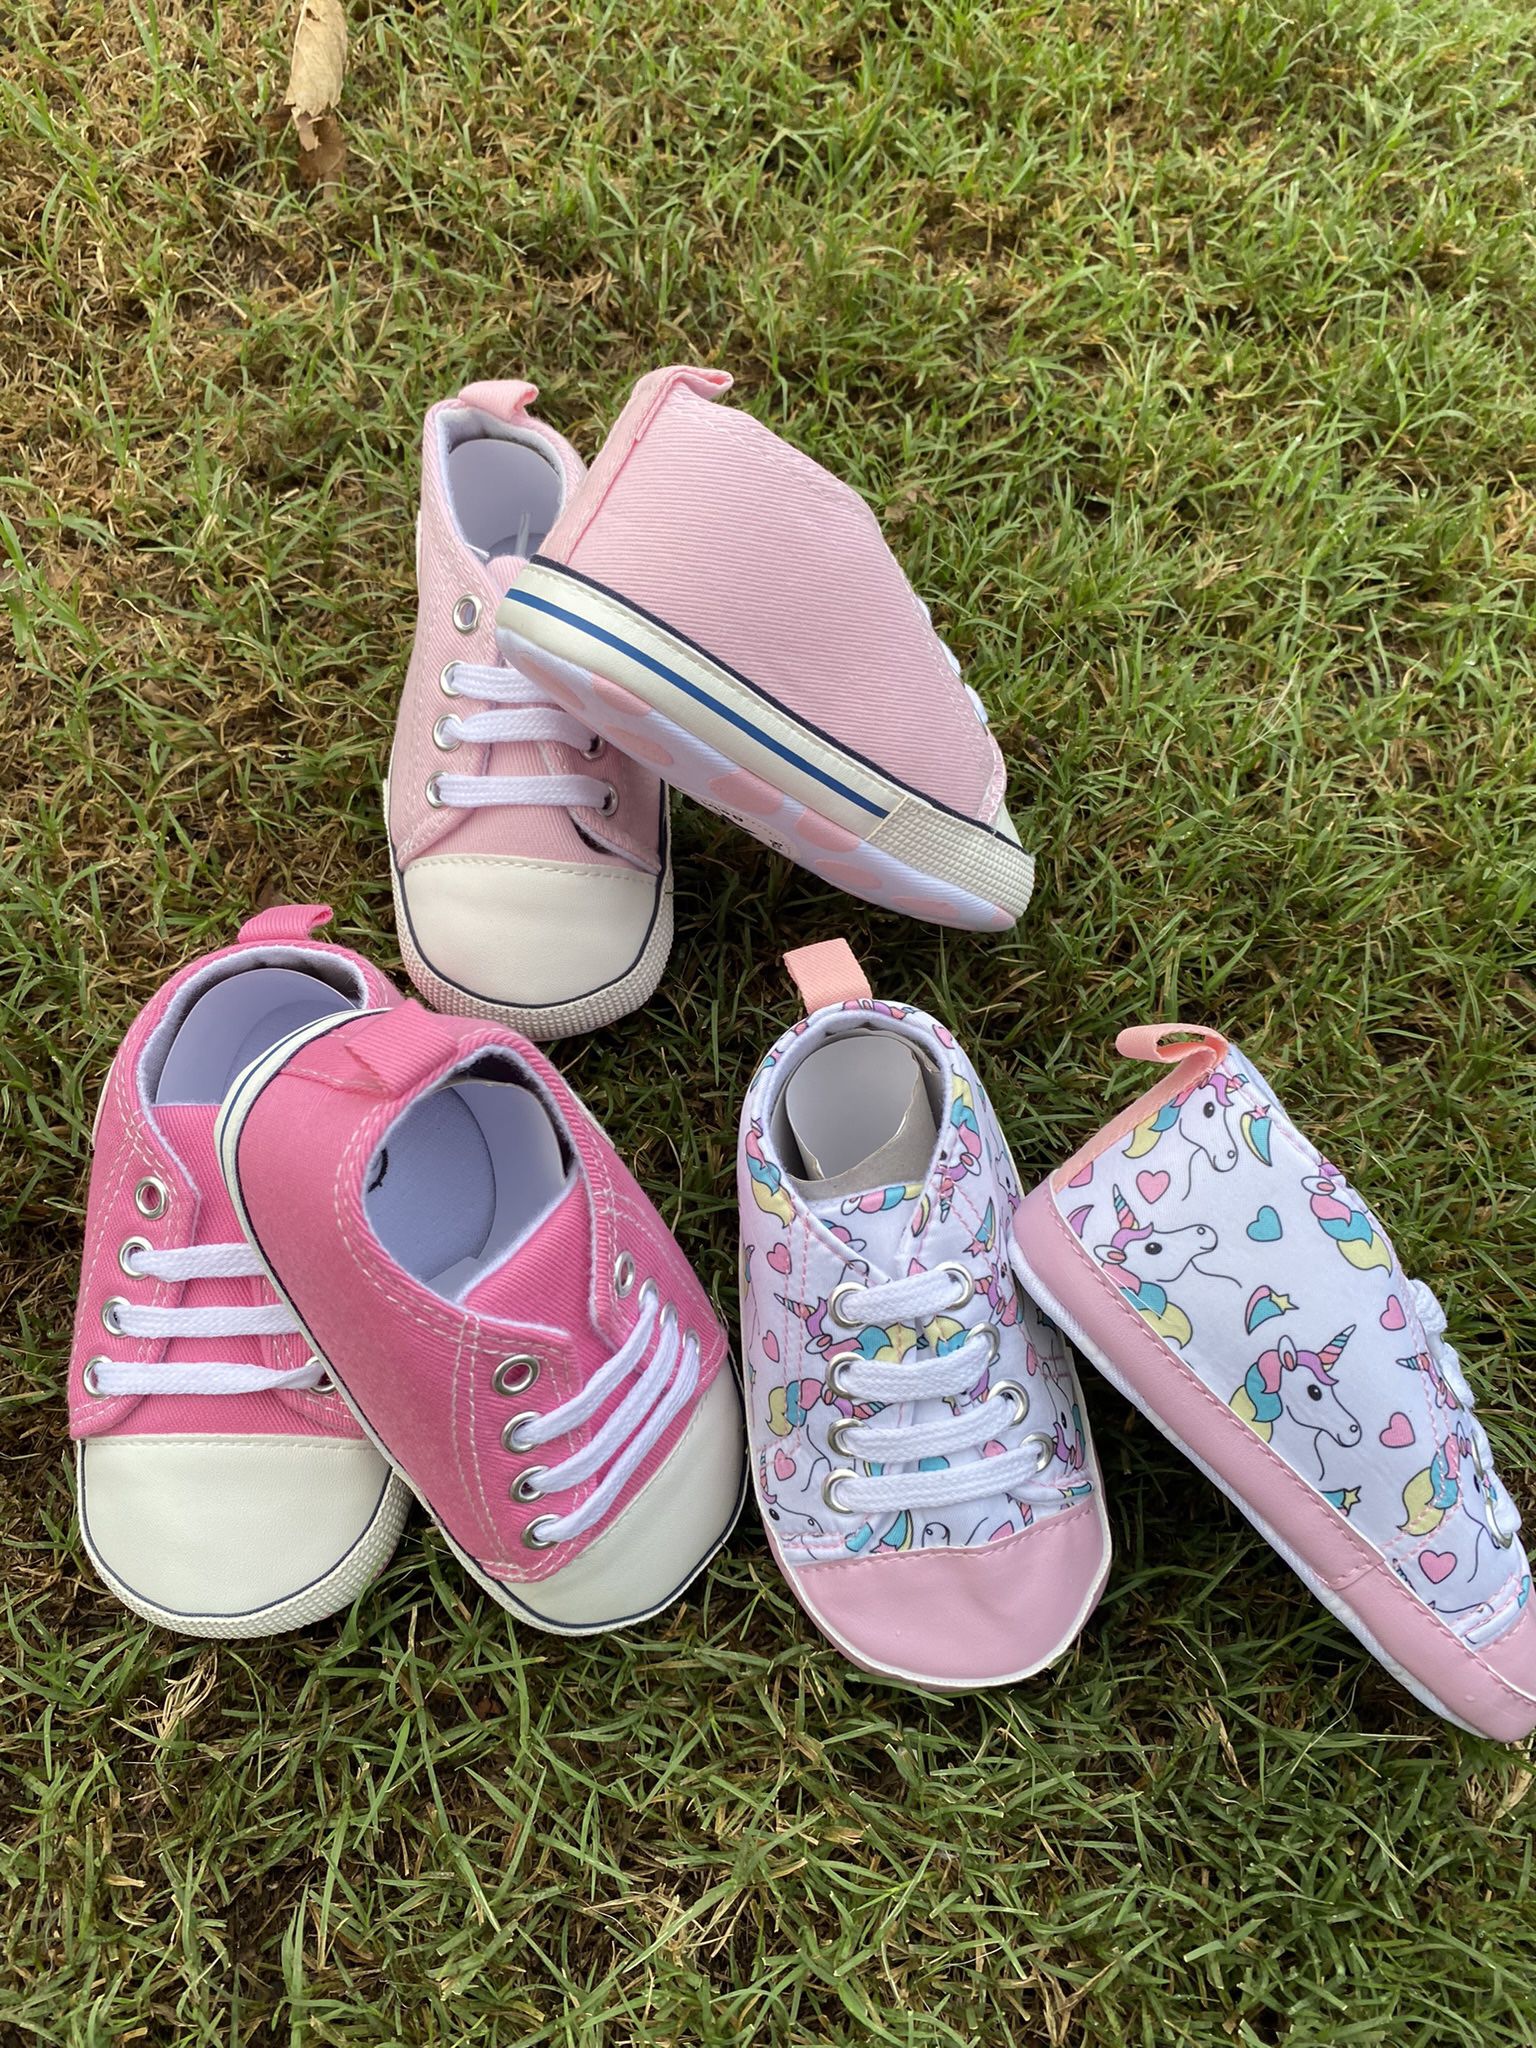 new Baby Girl Crib Shoes Lot Of 3 Size 12-18 Months 👧🏼💕👧🏼💕👧🏼💕👧🏼💕